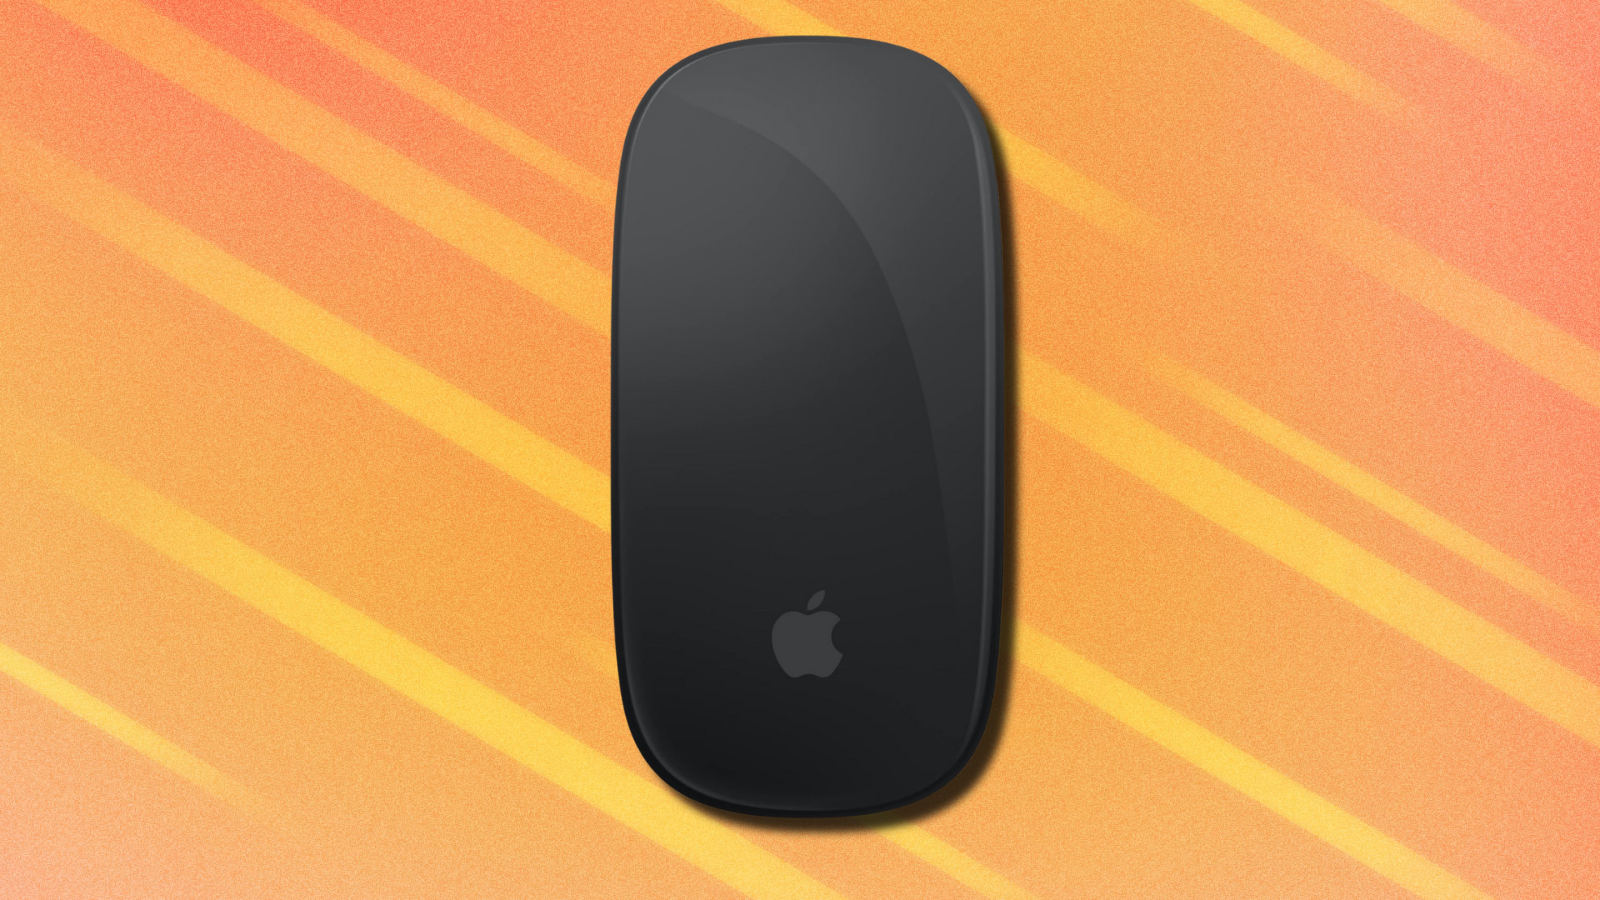 Apple Magic Mouse on orange abstract background